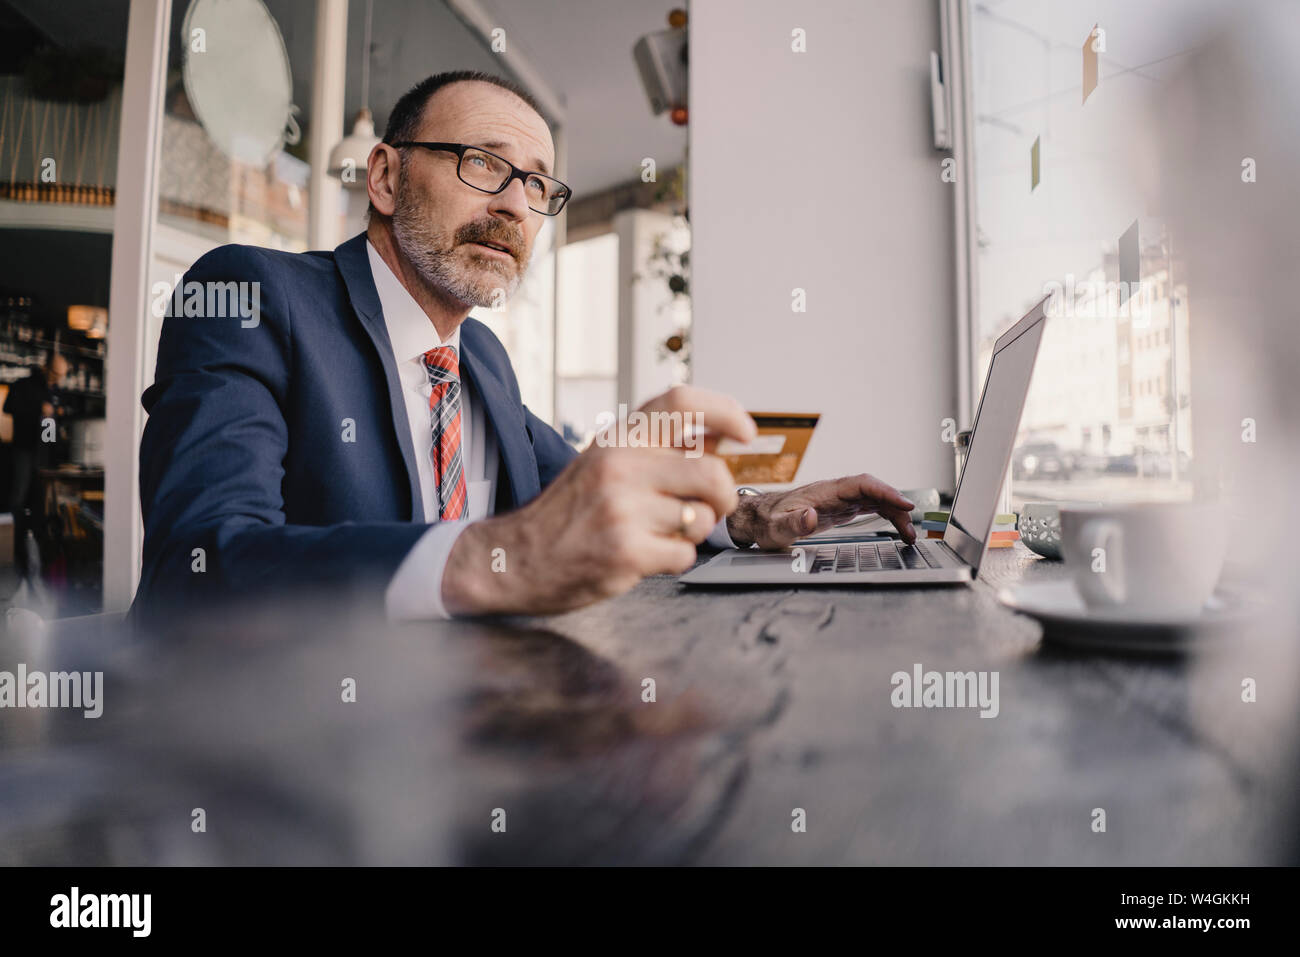 Mature businessman using laptop and credit card in a cafe Stock Photo